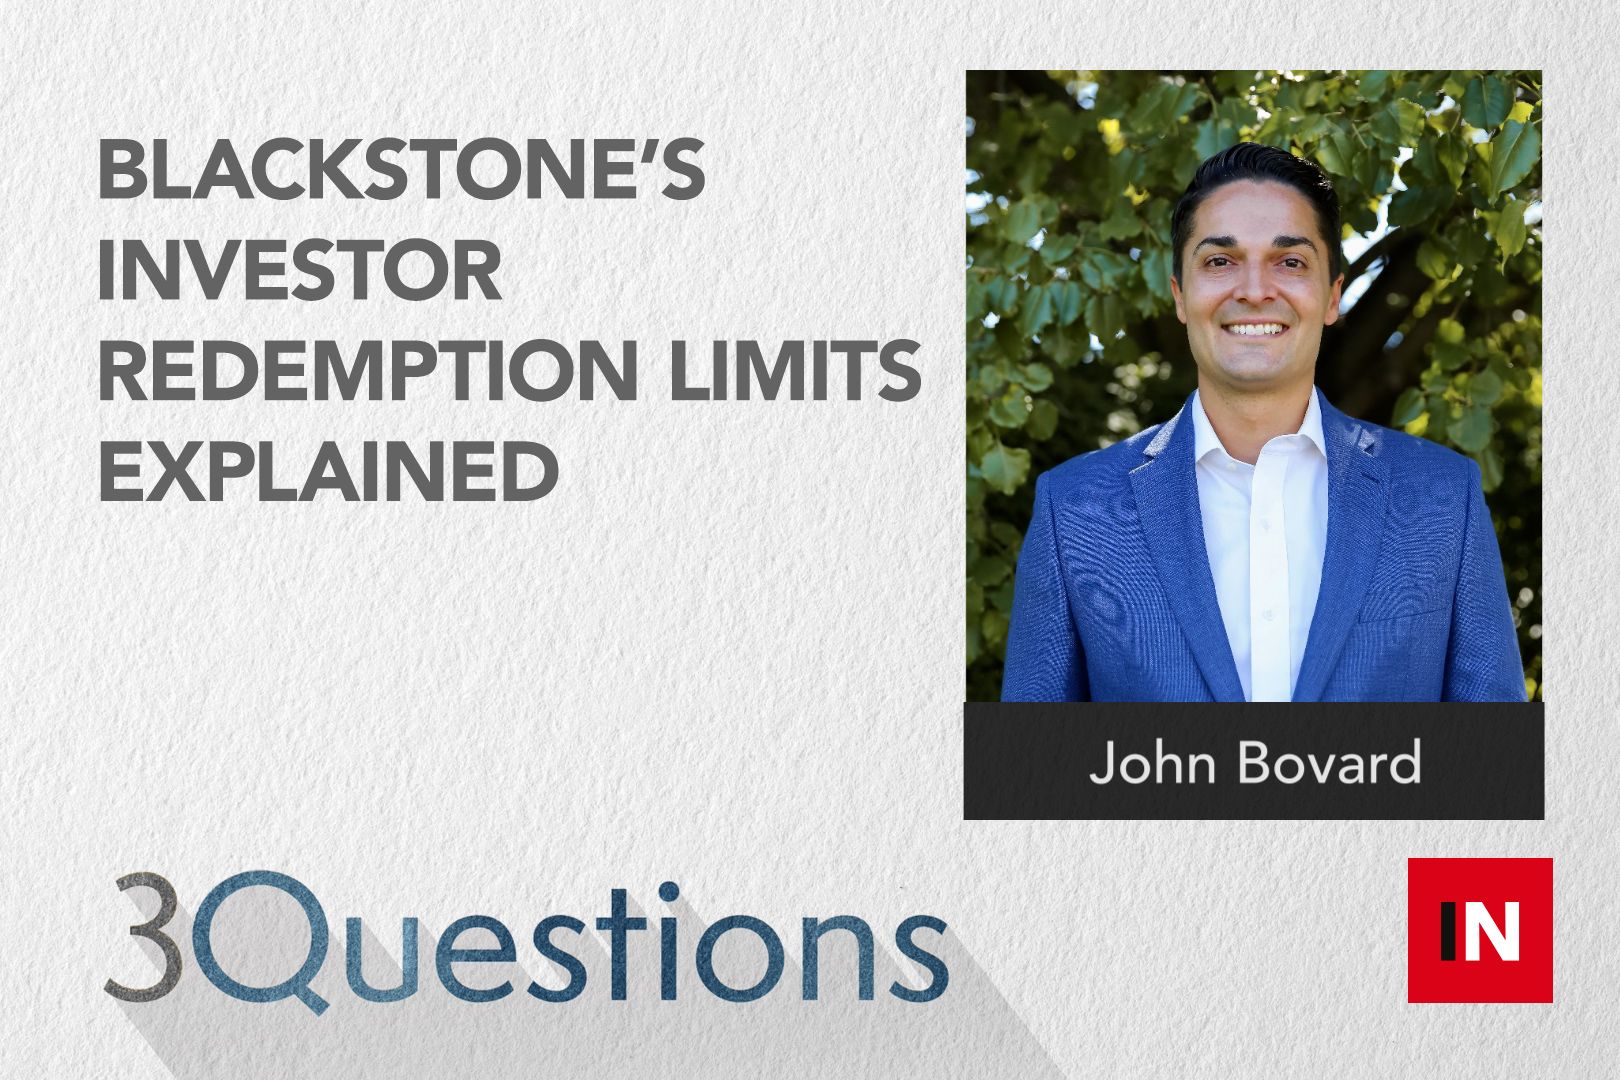 Blackstone’s investor redemption limits on REIT explained